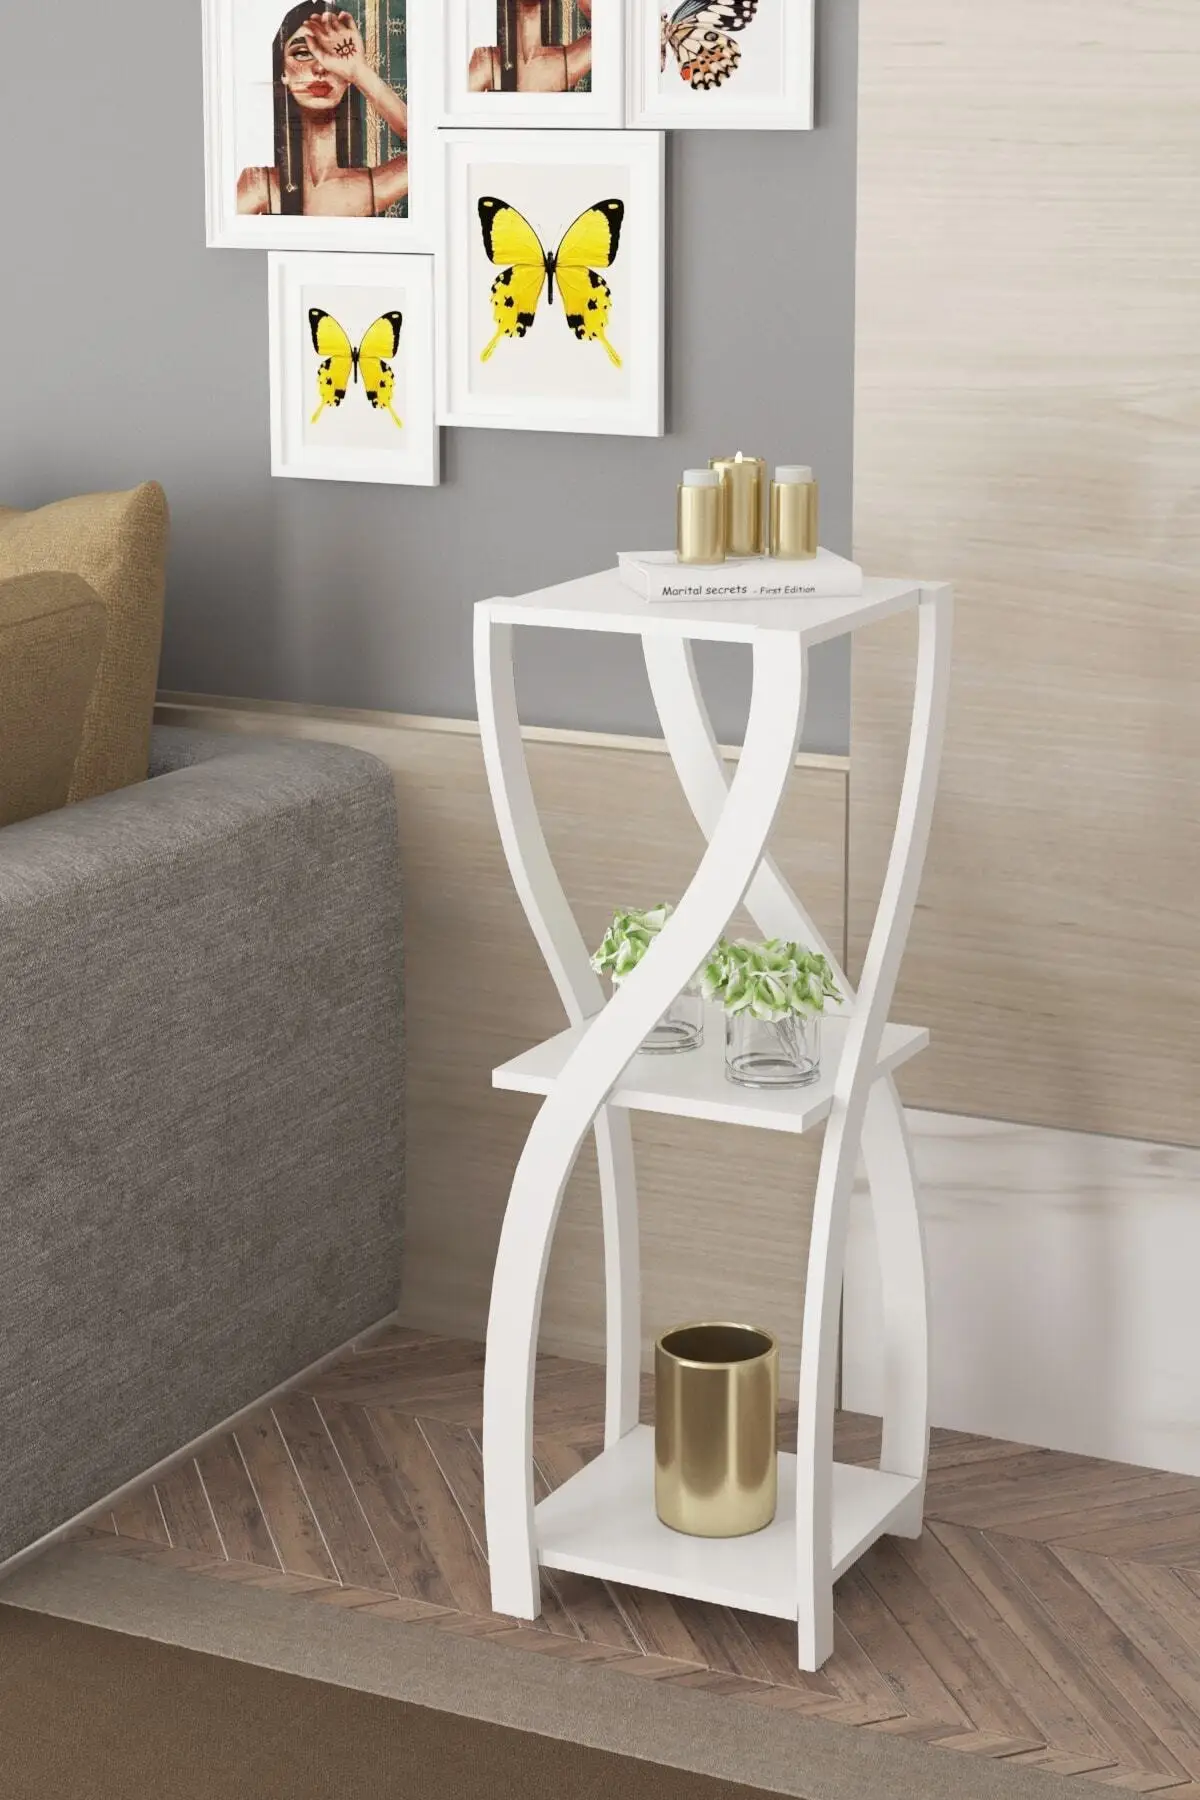 decorative-coffee-table-flowerpot-stand-side-table-flower-pot-balanced-durable-ergonomic-structure-of-nest-of-tables-small-interior